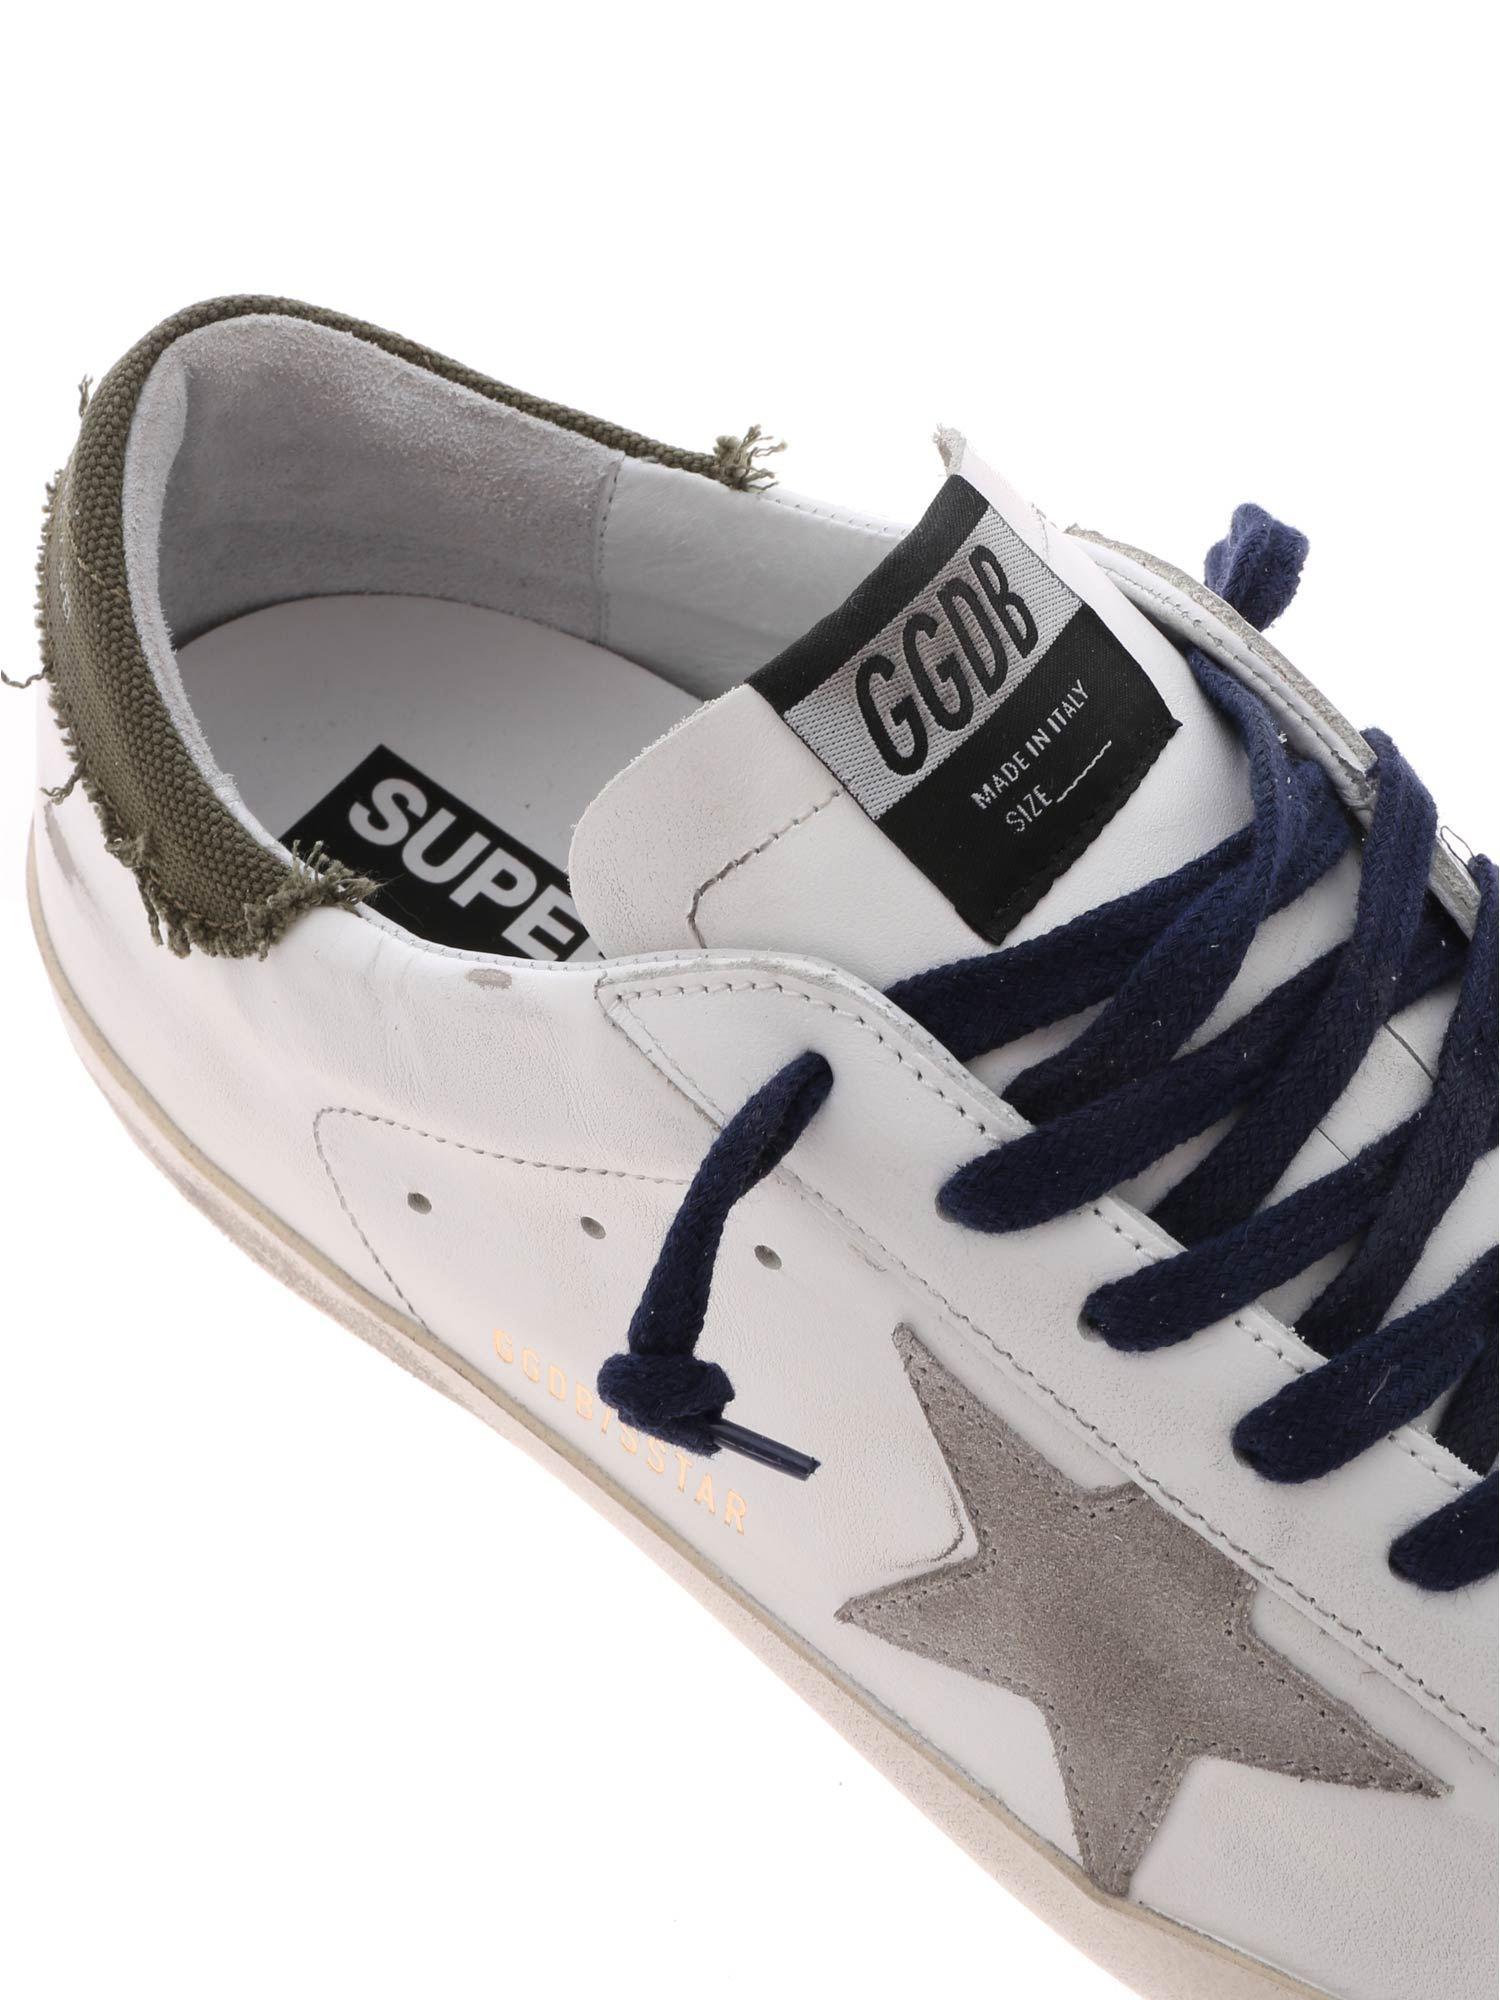 Golden Goose Deluxe Brand Leather White Superstar Sneakers With Blue